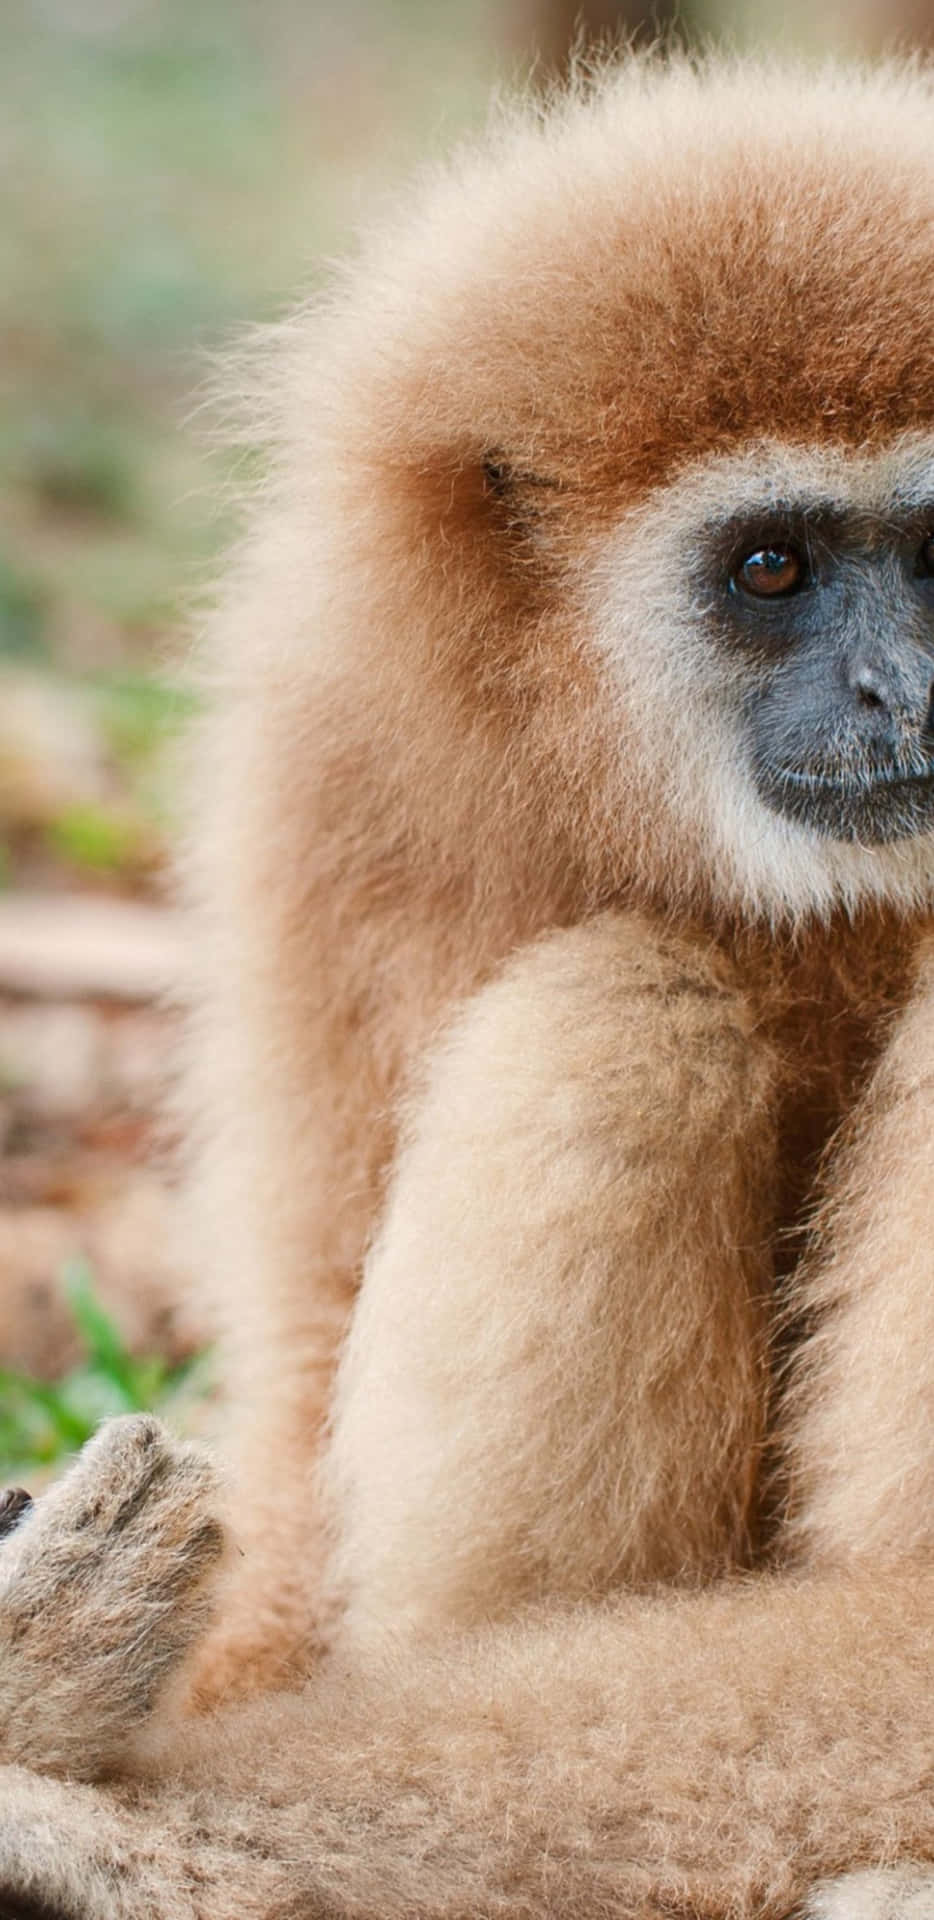 Get the new Pixel 3XL Gibbon for the ultimate mobile experience